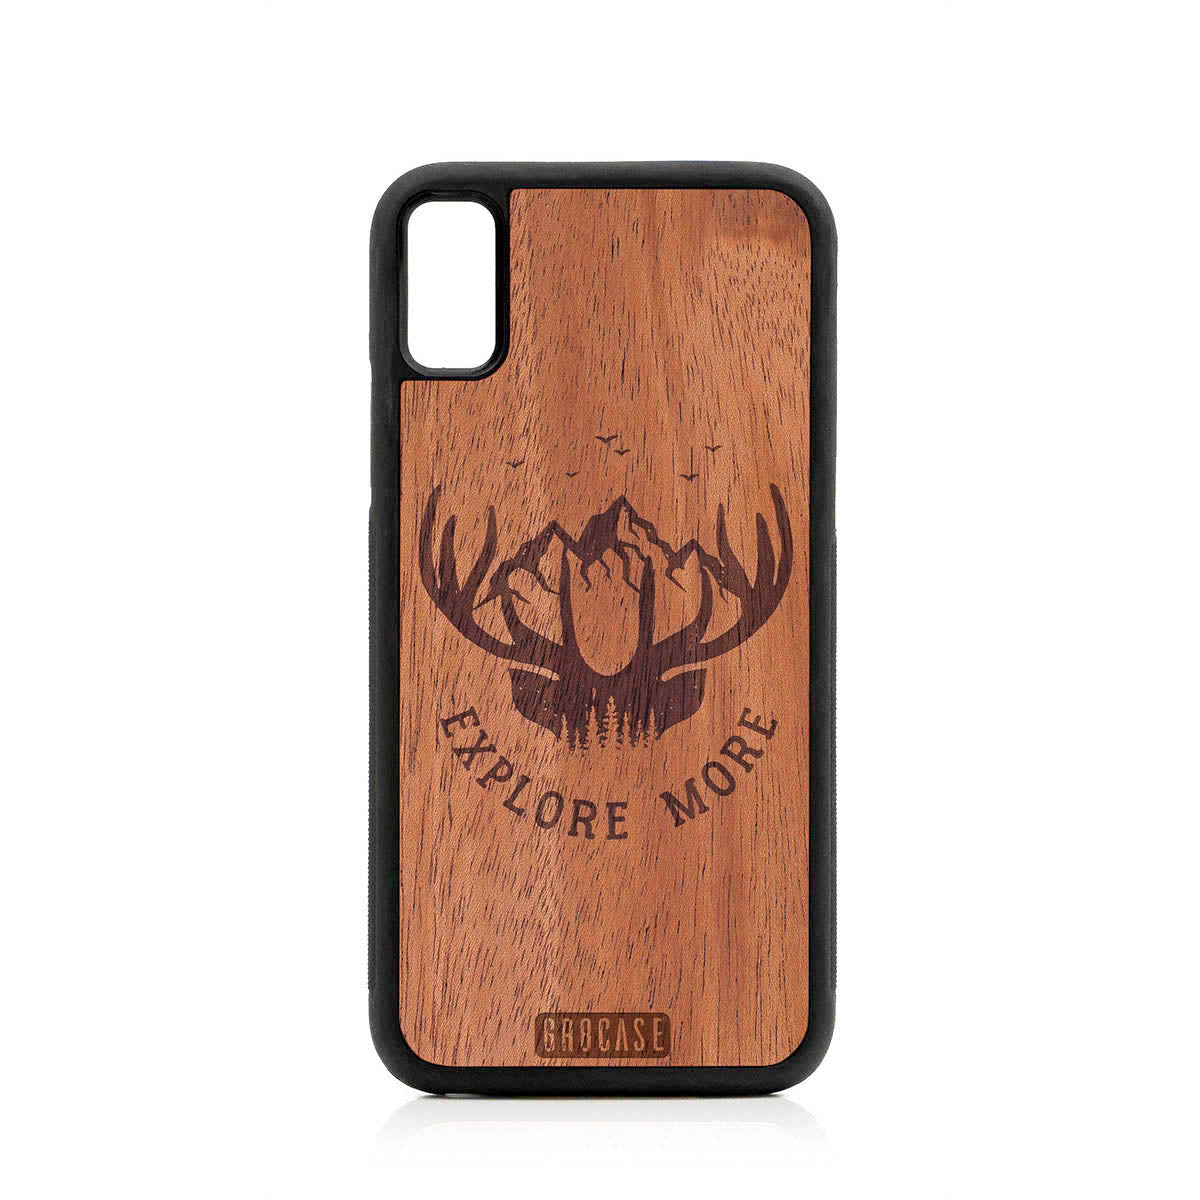 Explore More (Forest, Mountains & Antlers) Design Wood Case For iPhone XS Max by GR8CASE